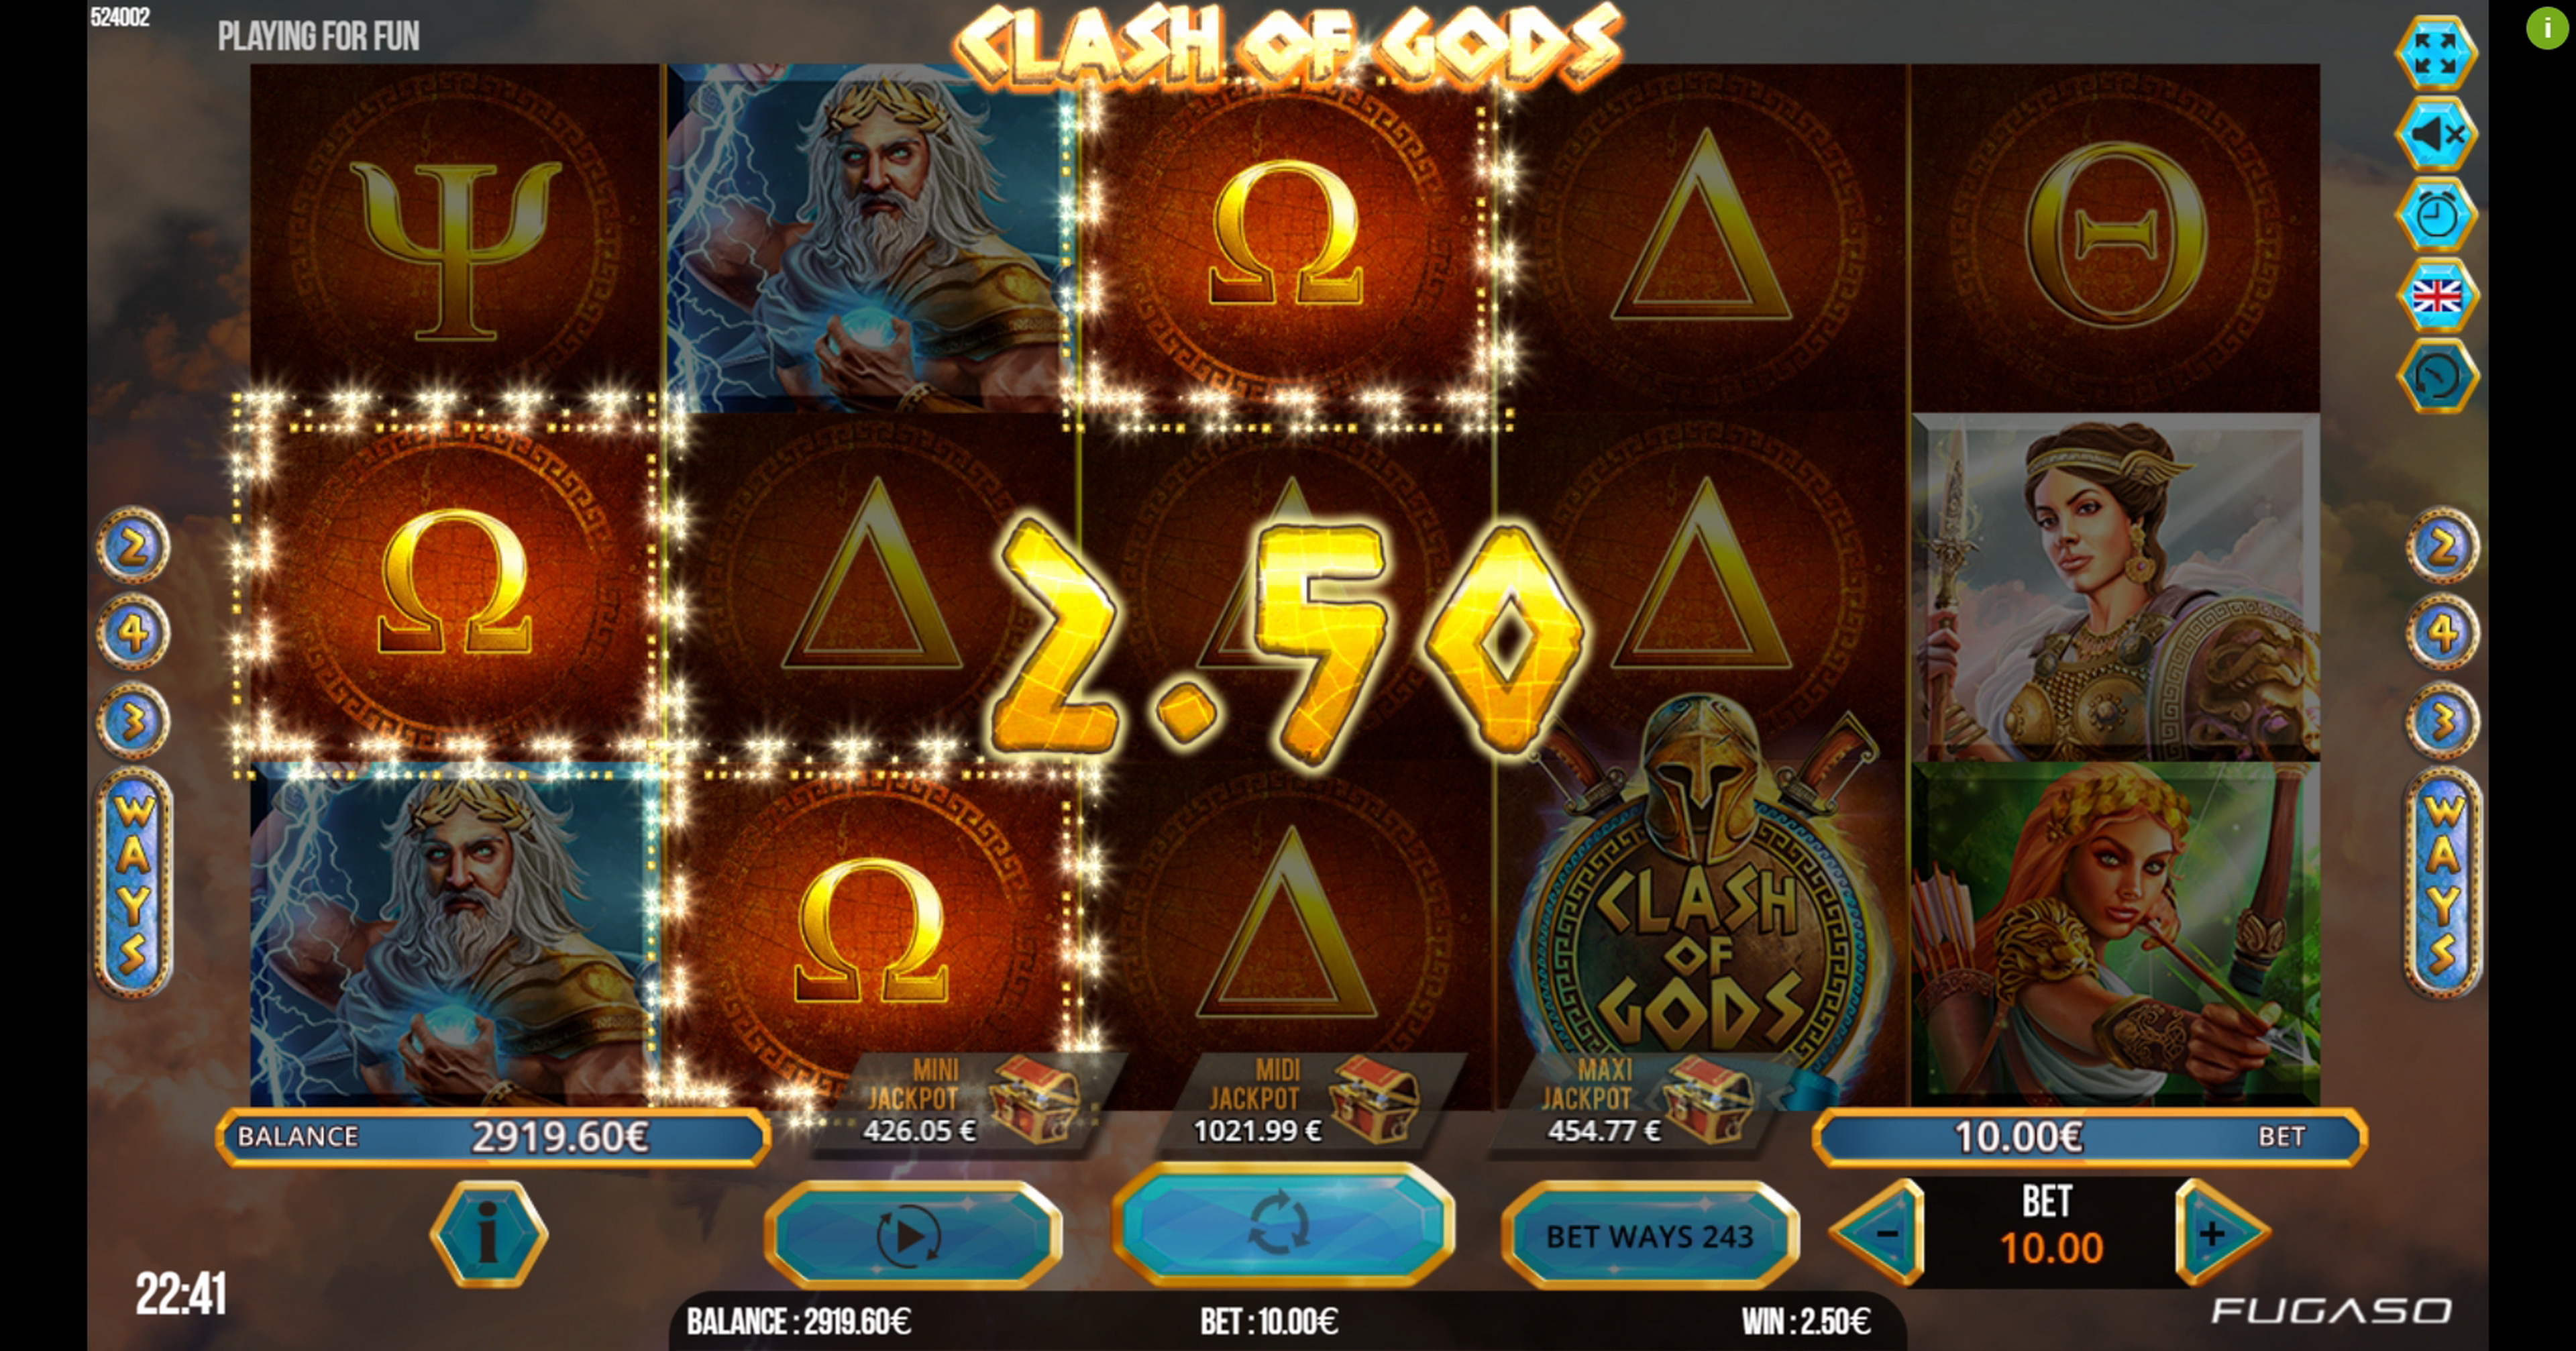 Win Money in Clash of Gods Free Slot Game by Fugaso